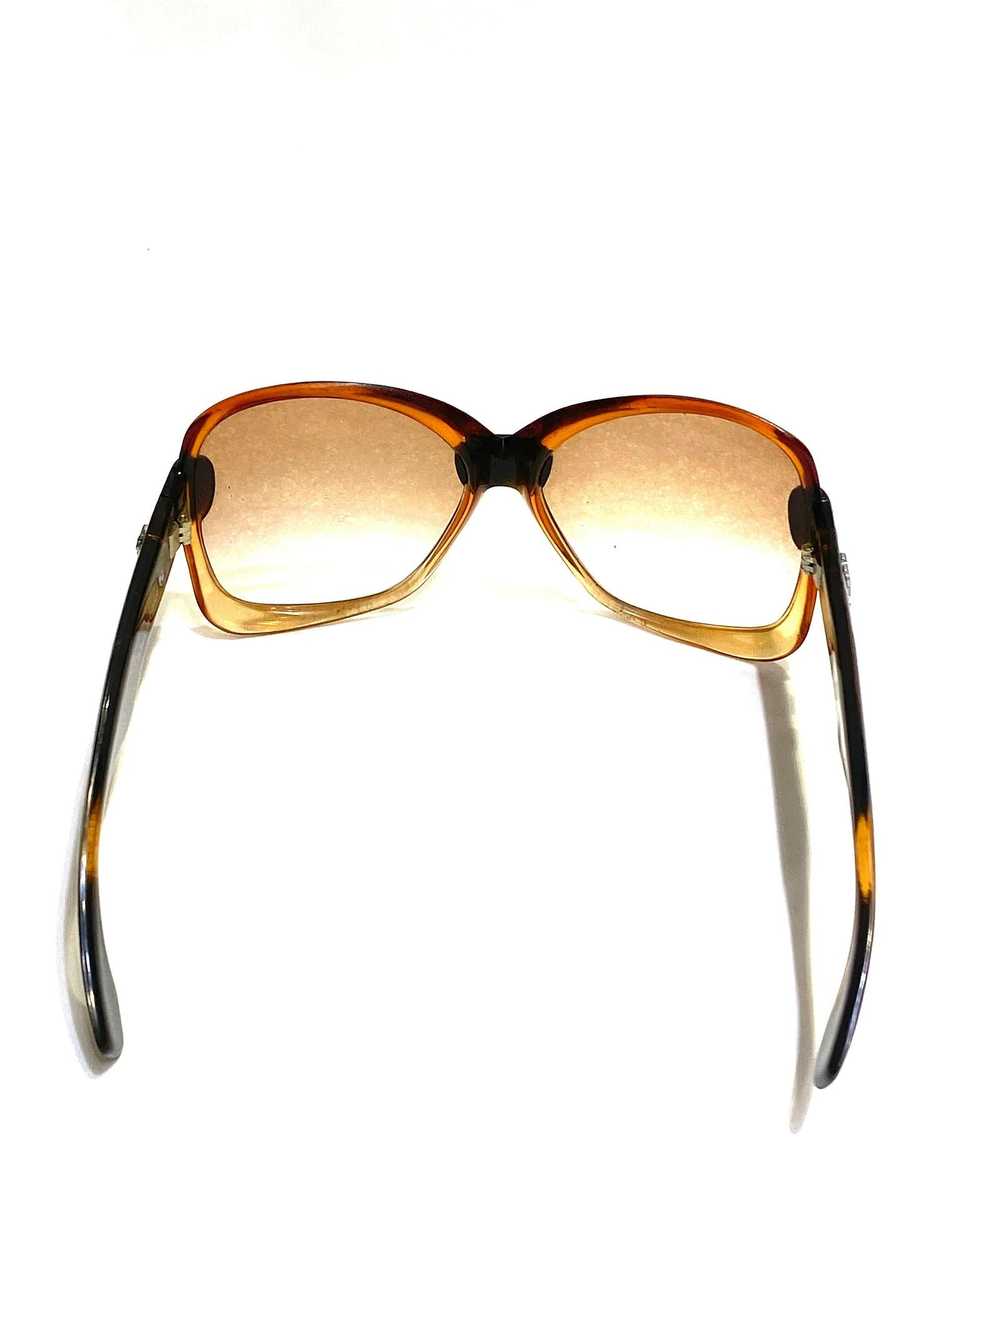 Vintage YSL Brown and Black Square Sunglasses - image 2